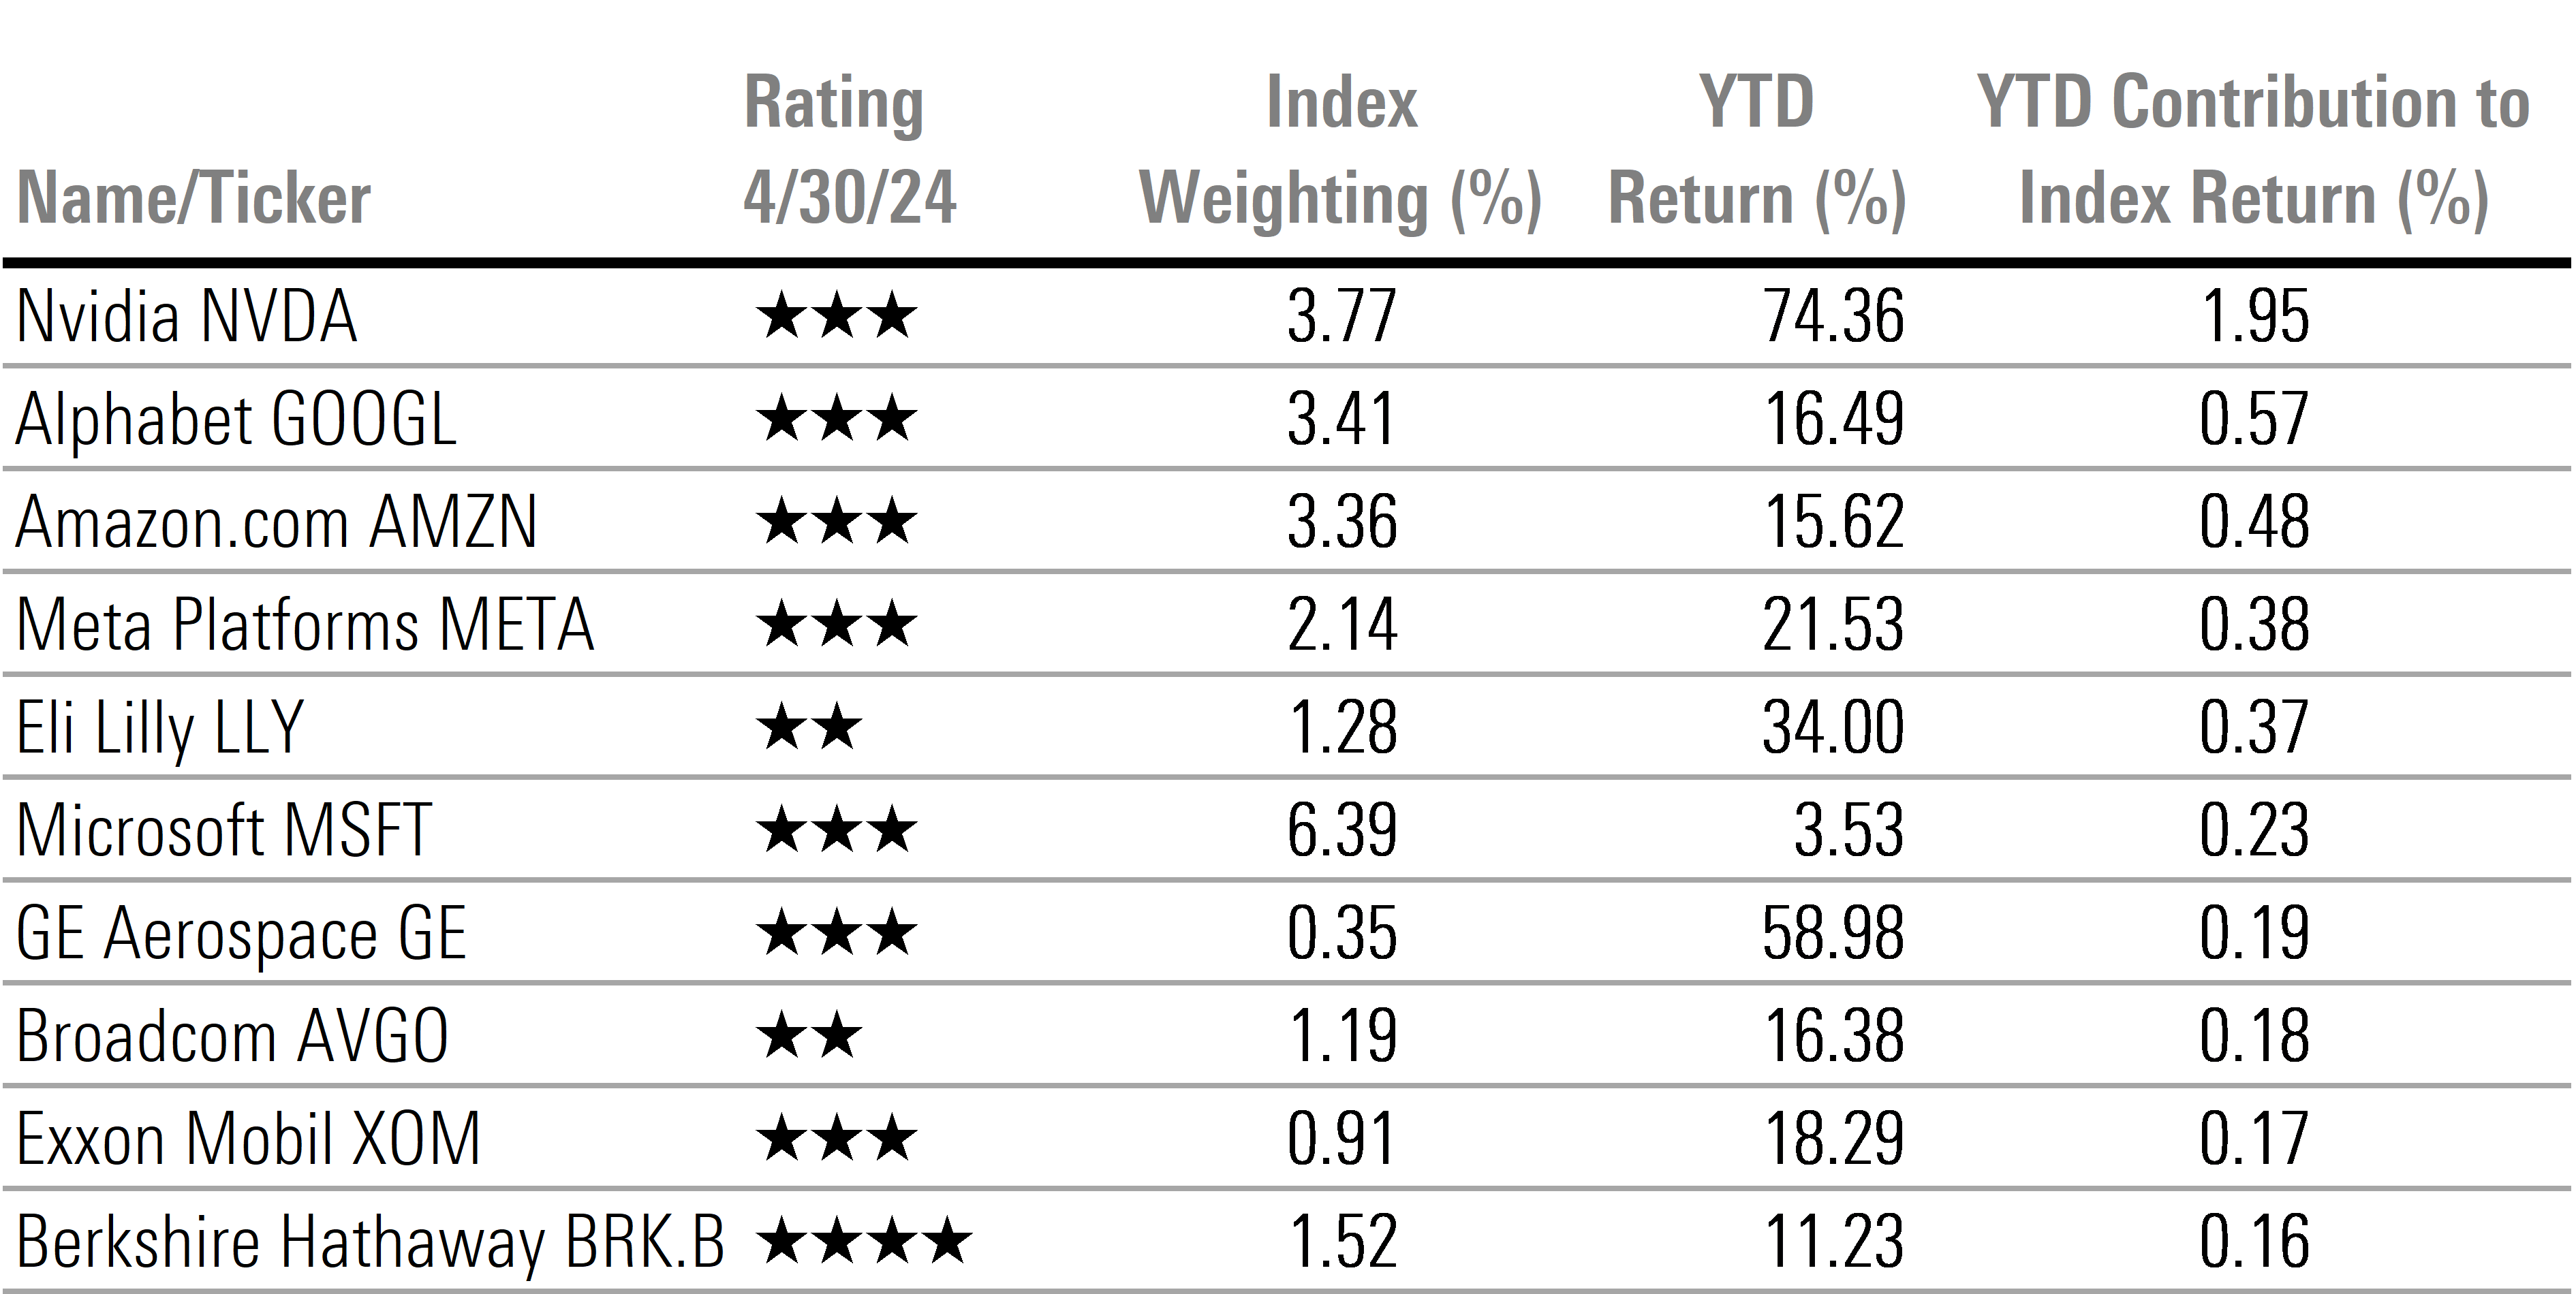 Table that displays current star rating, index weighting, YTD return and YTD contribution of the top 10 stocks that contribute to year to date market return.